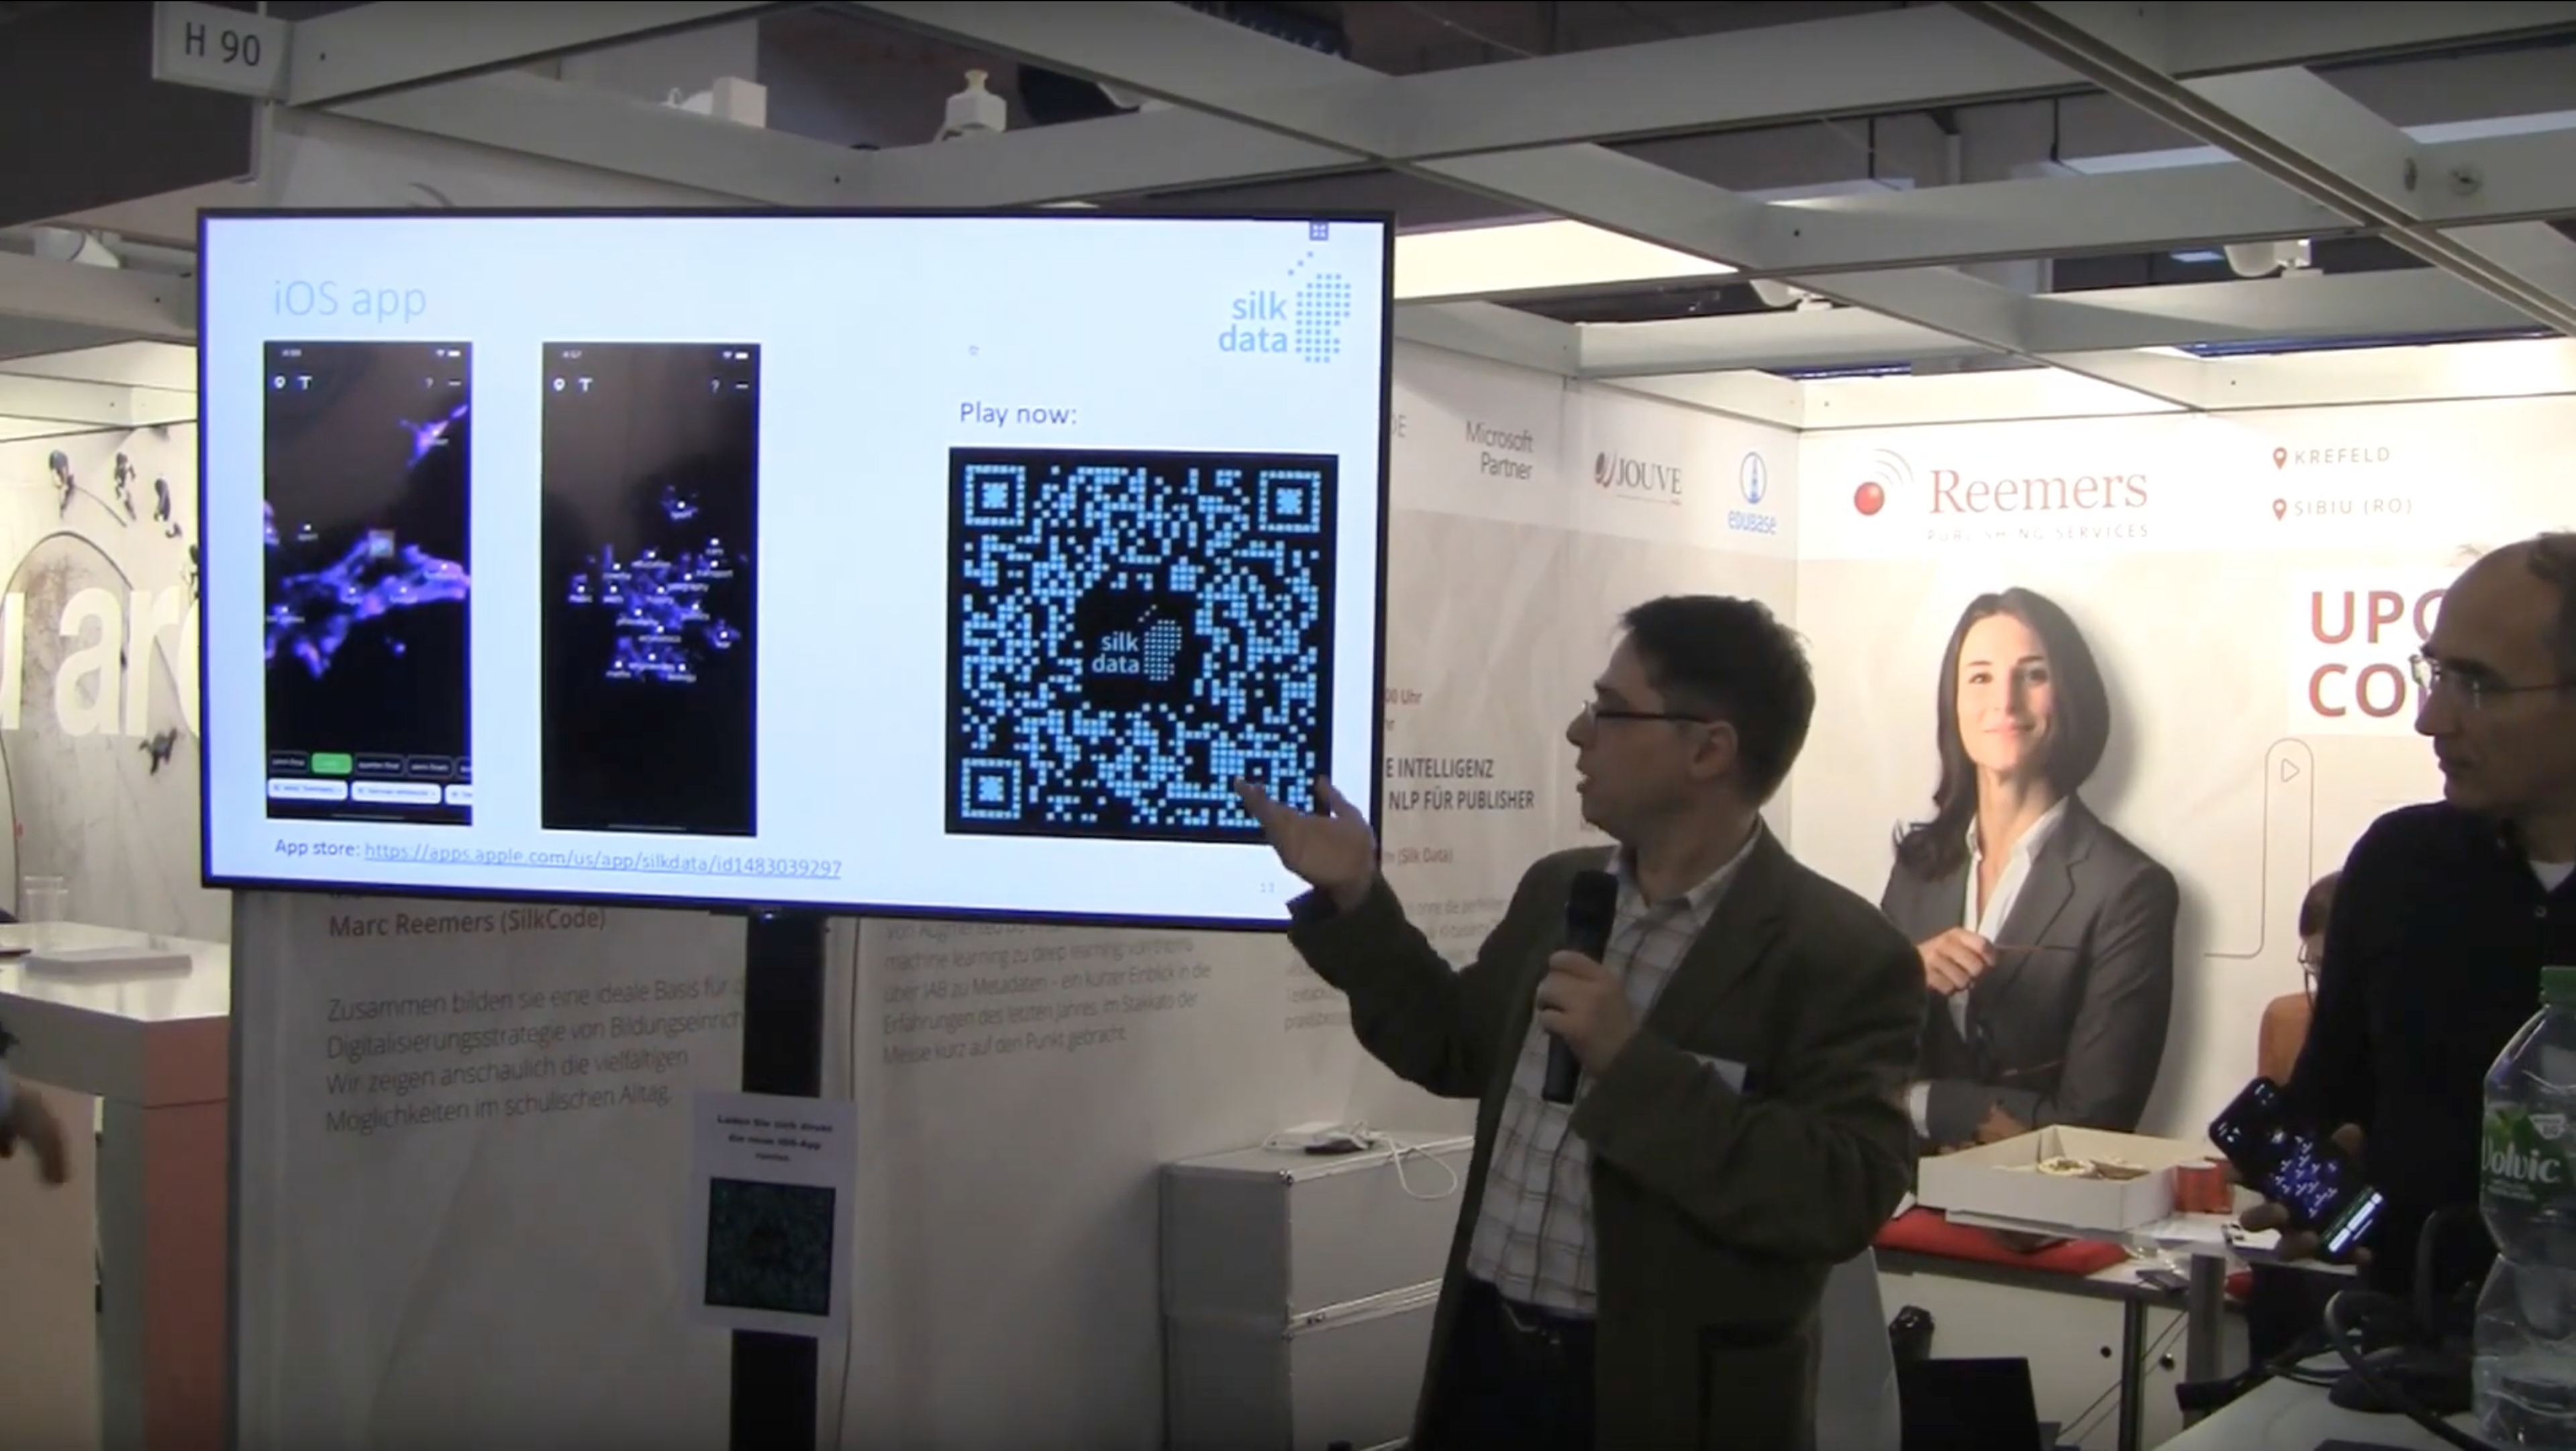 Silk Data introduced Semantic Search technology at the world’s largest Book Fair